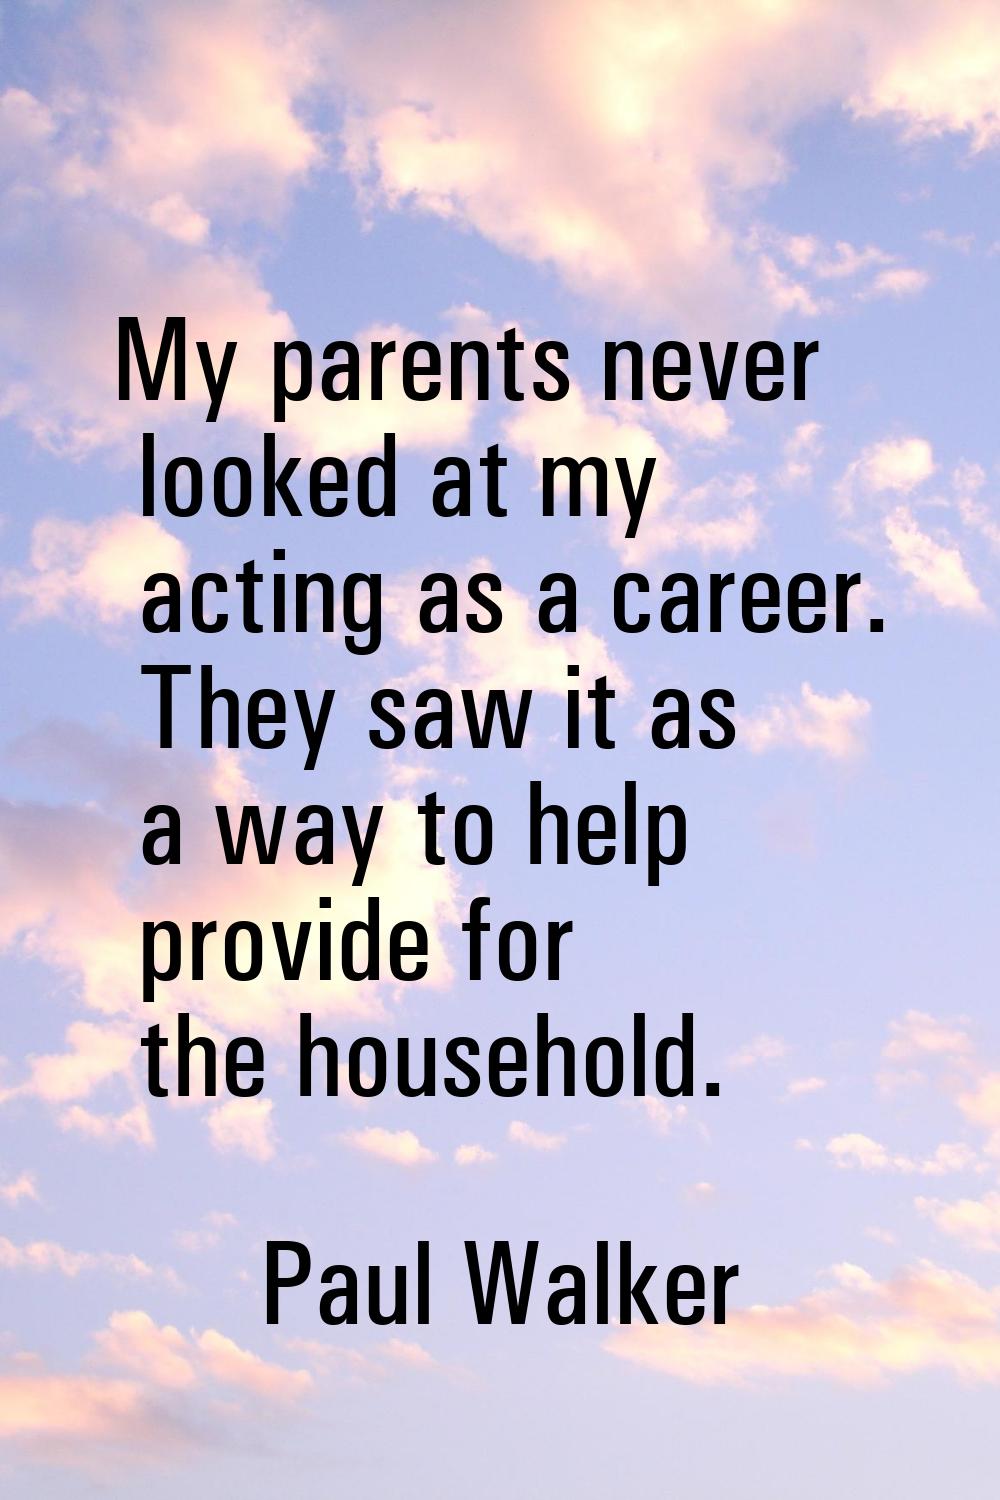 My parents never looked at my acting as a career. They saw it as a way to help provide for the hous